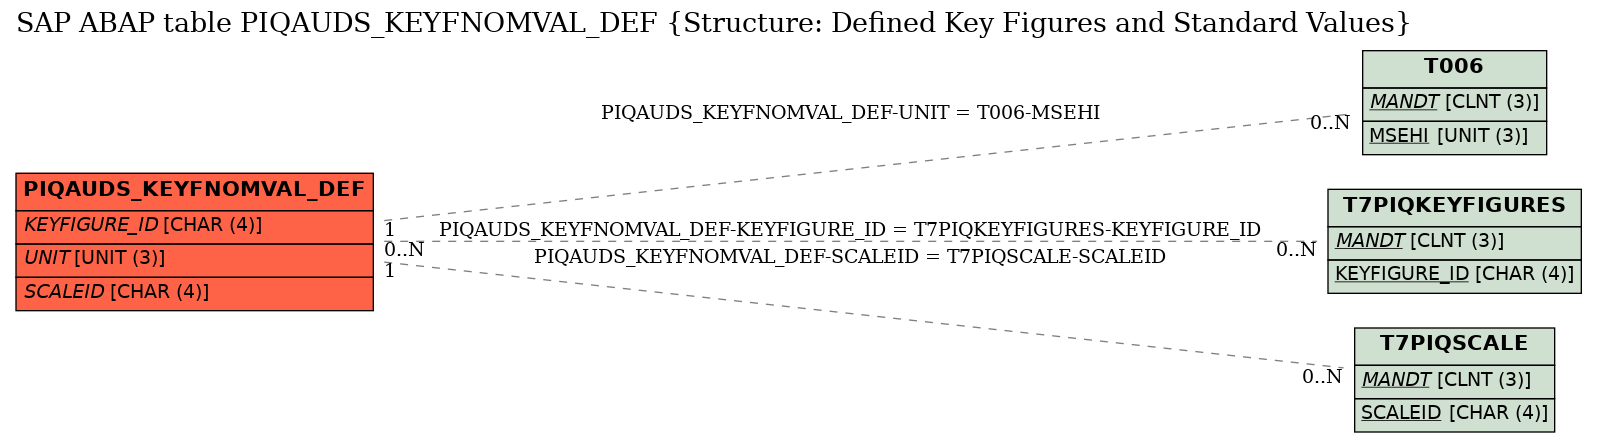 E-R Diagram for table PIQAUDS_KEYFNOMVAL_DEF (Structure: Defined Key Figures and Standard Values)